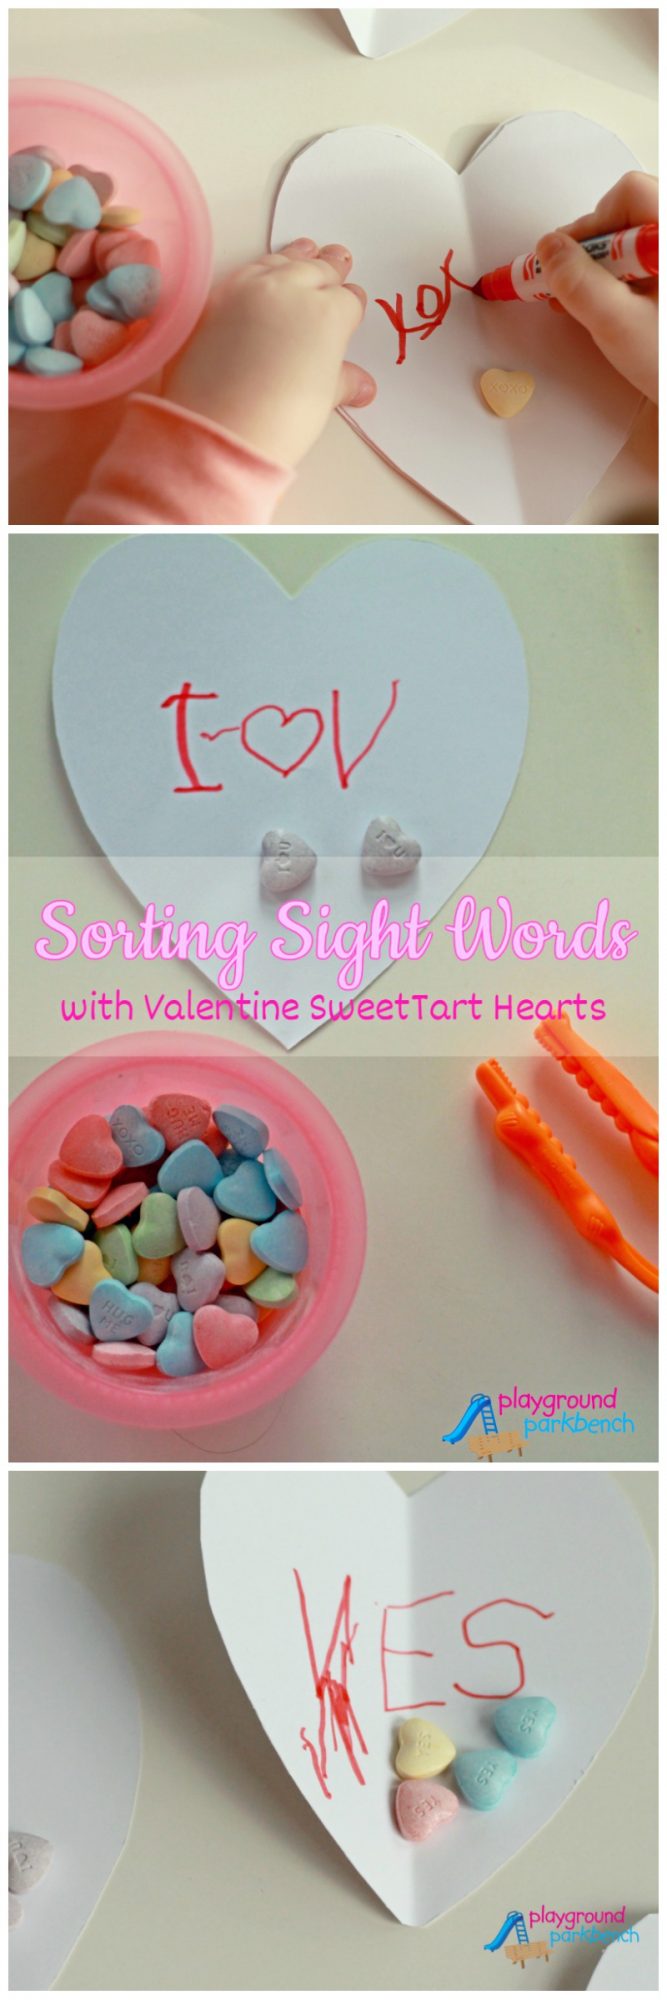 Sorting Sight Words with Valentine Candy